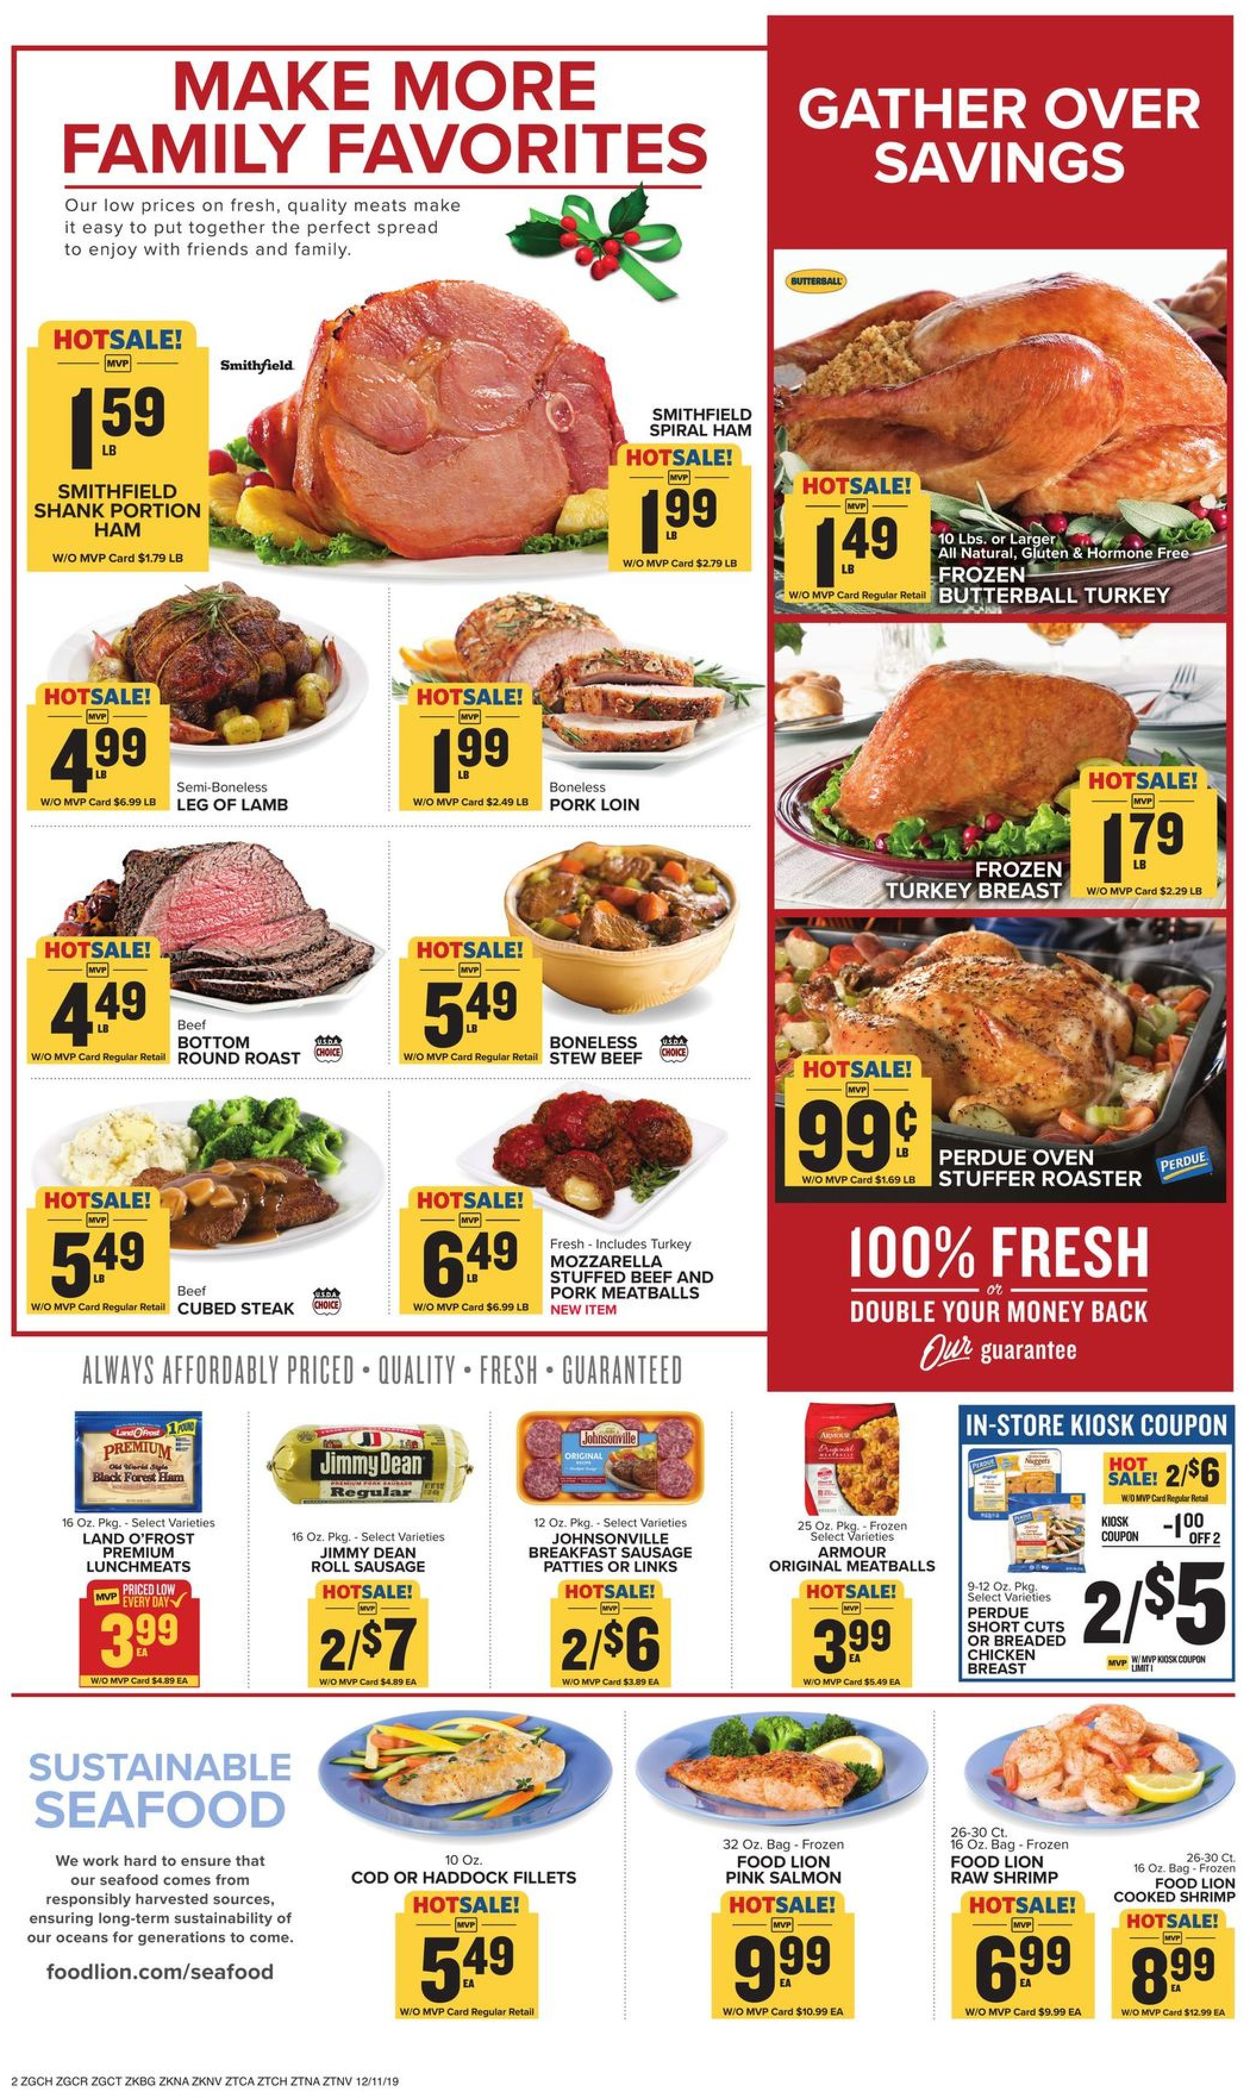 Catalogue Food Lion - Holidays Ad 2019 from 12/11/2019